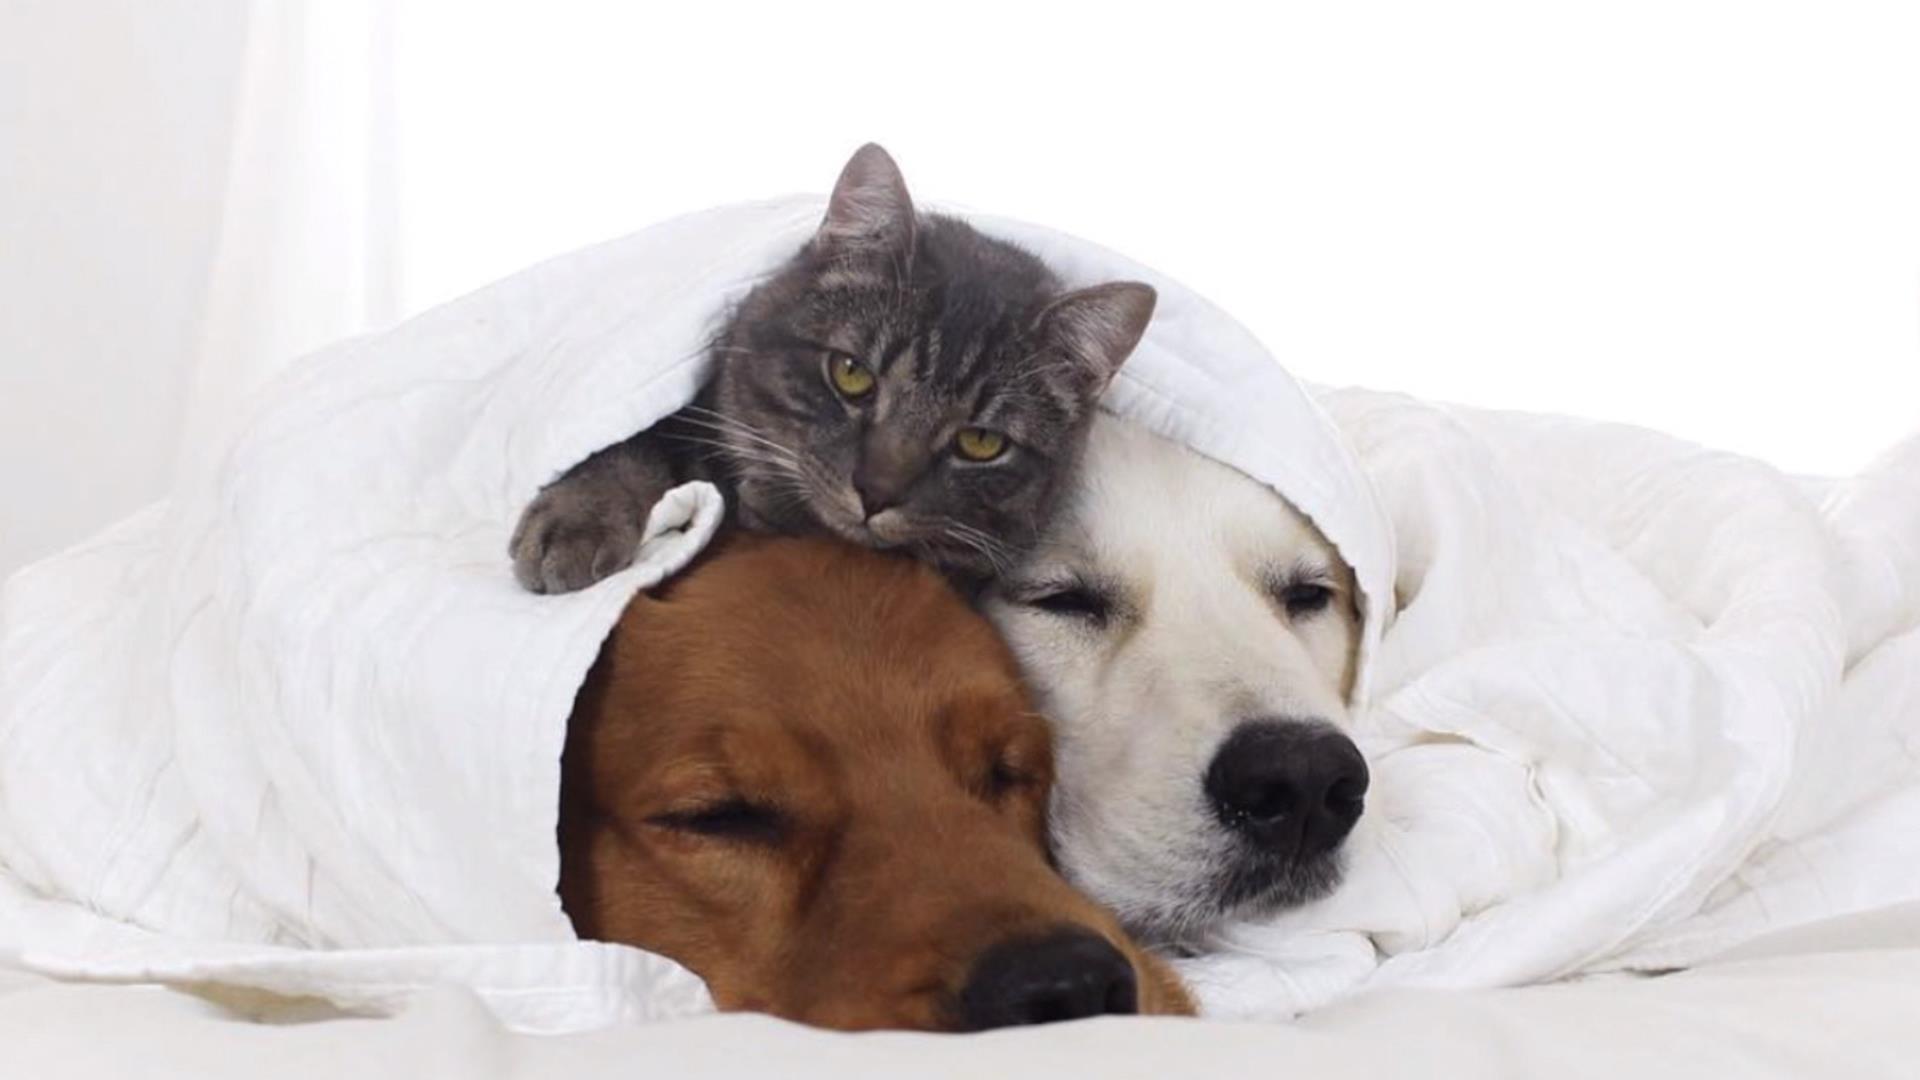 Watch these dogs and cat snuggle up for their nap